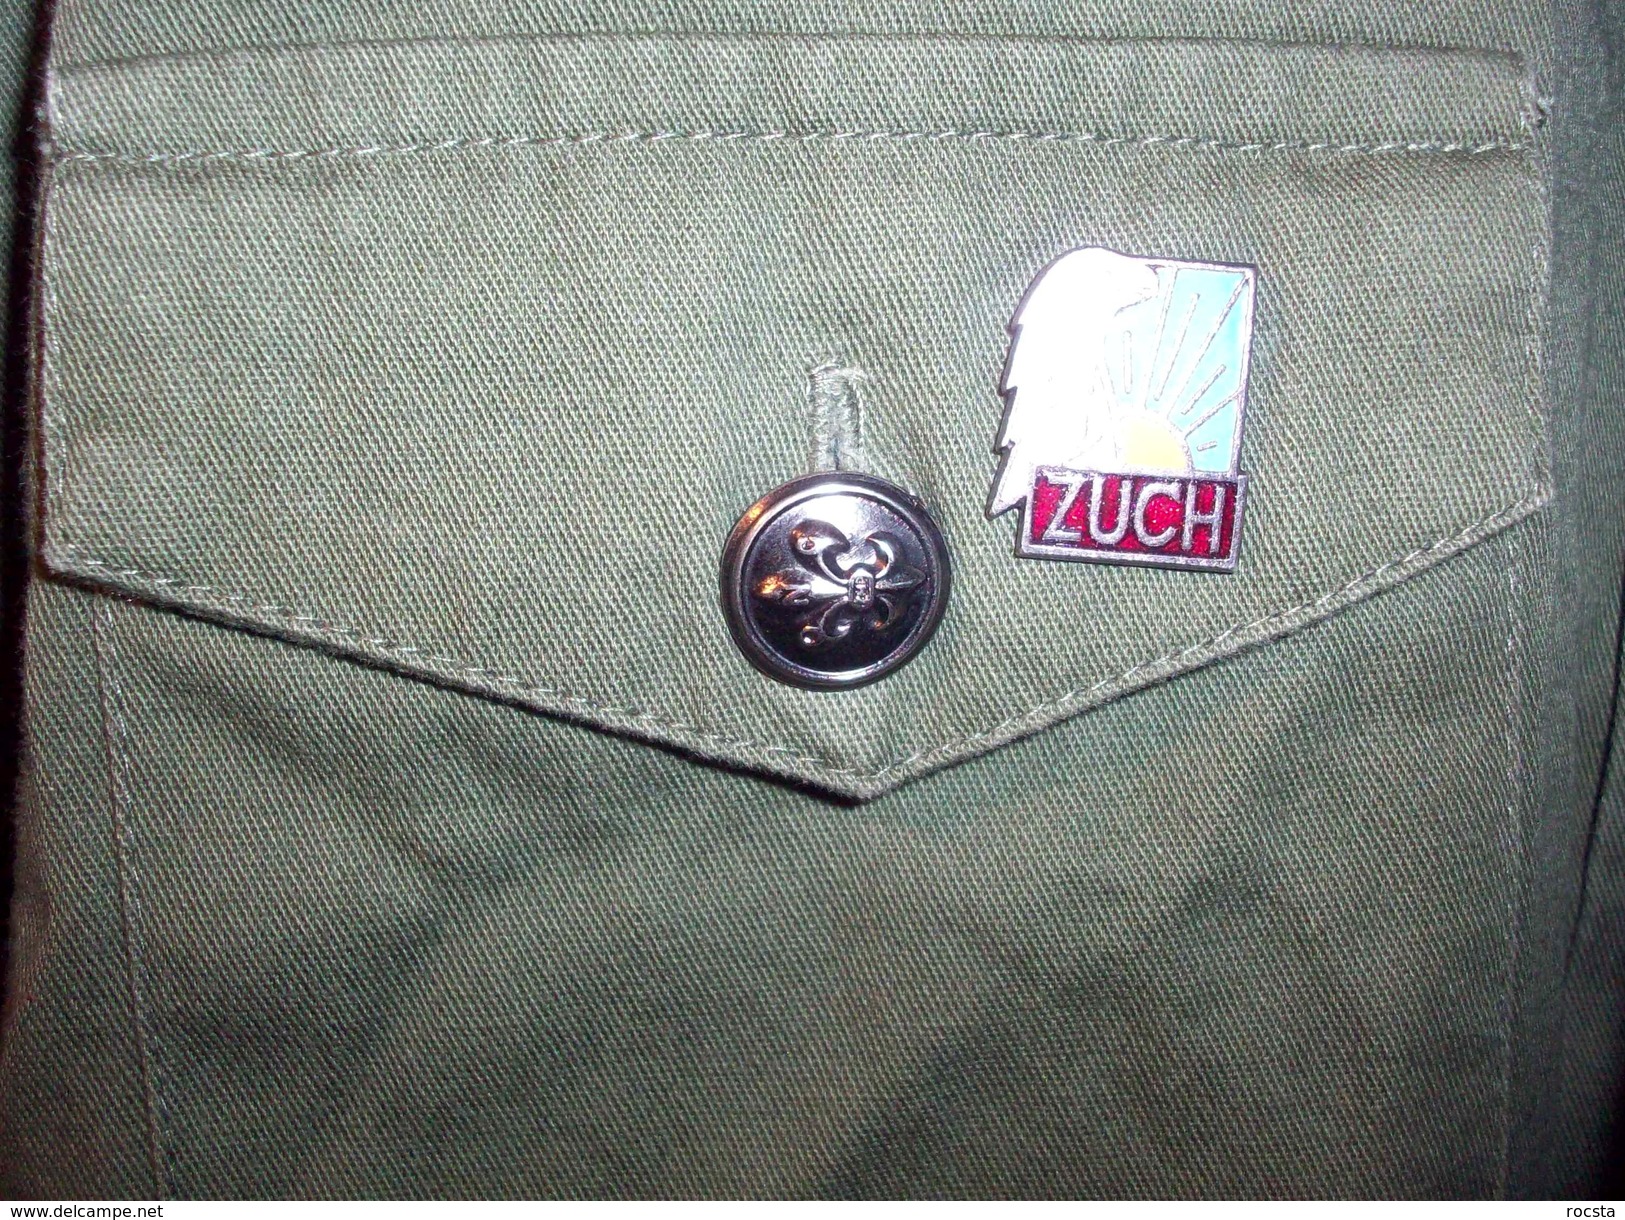 Poland Scout ZUCH Olive Shirt - With Patches, Badges, Ranks, Epaulets & Tie - Scouting